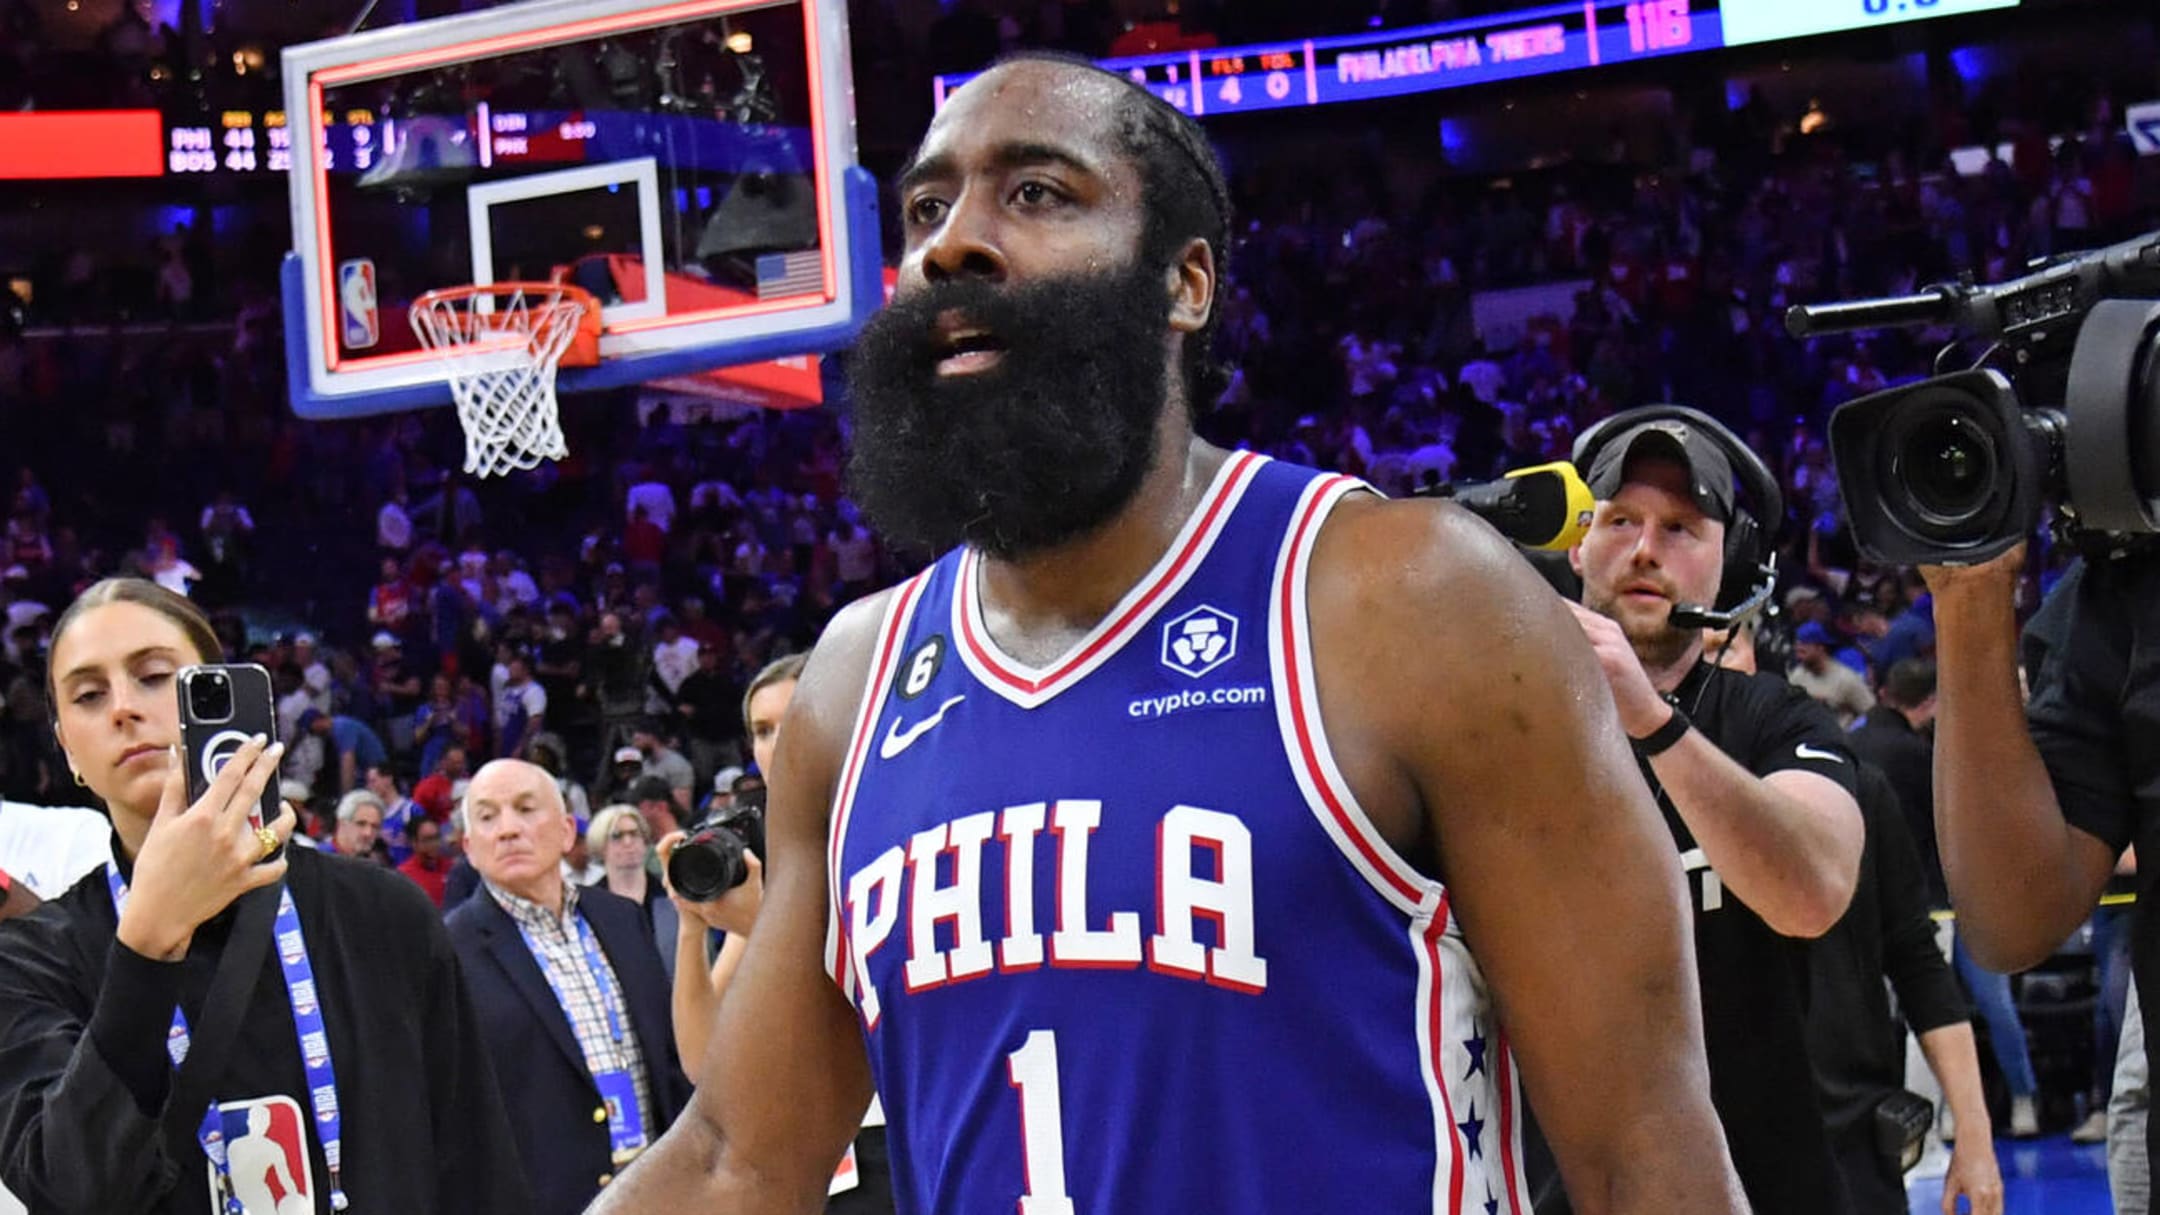 Report: James Harden to take $15M paycut in order to help Sixers